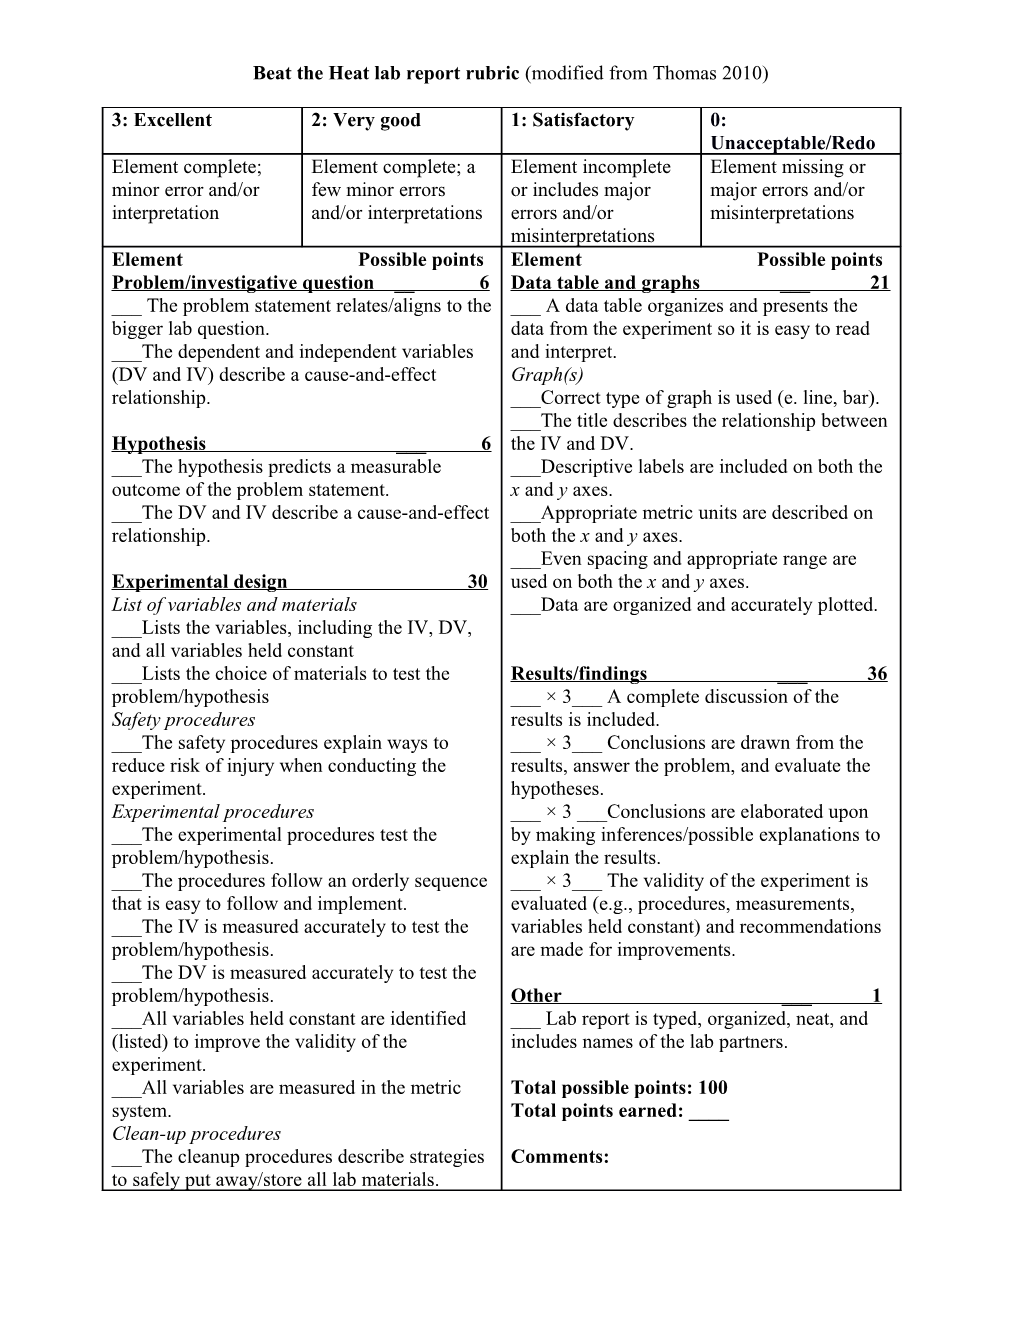 Beat the Heat Lab Report Rubric (Modified from Thomas 2010)